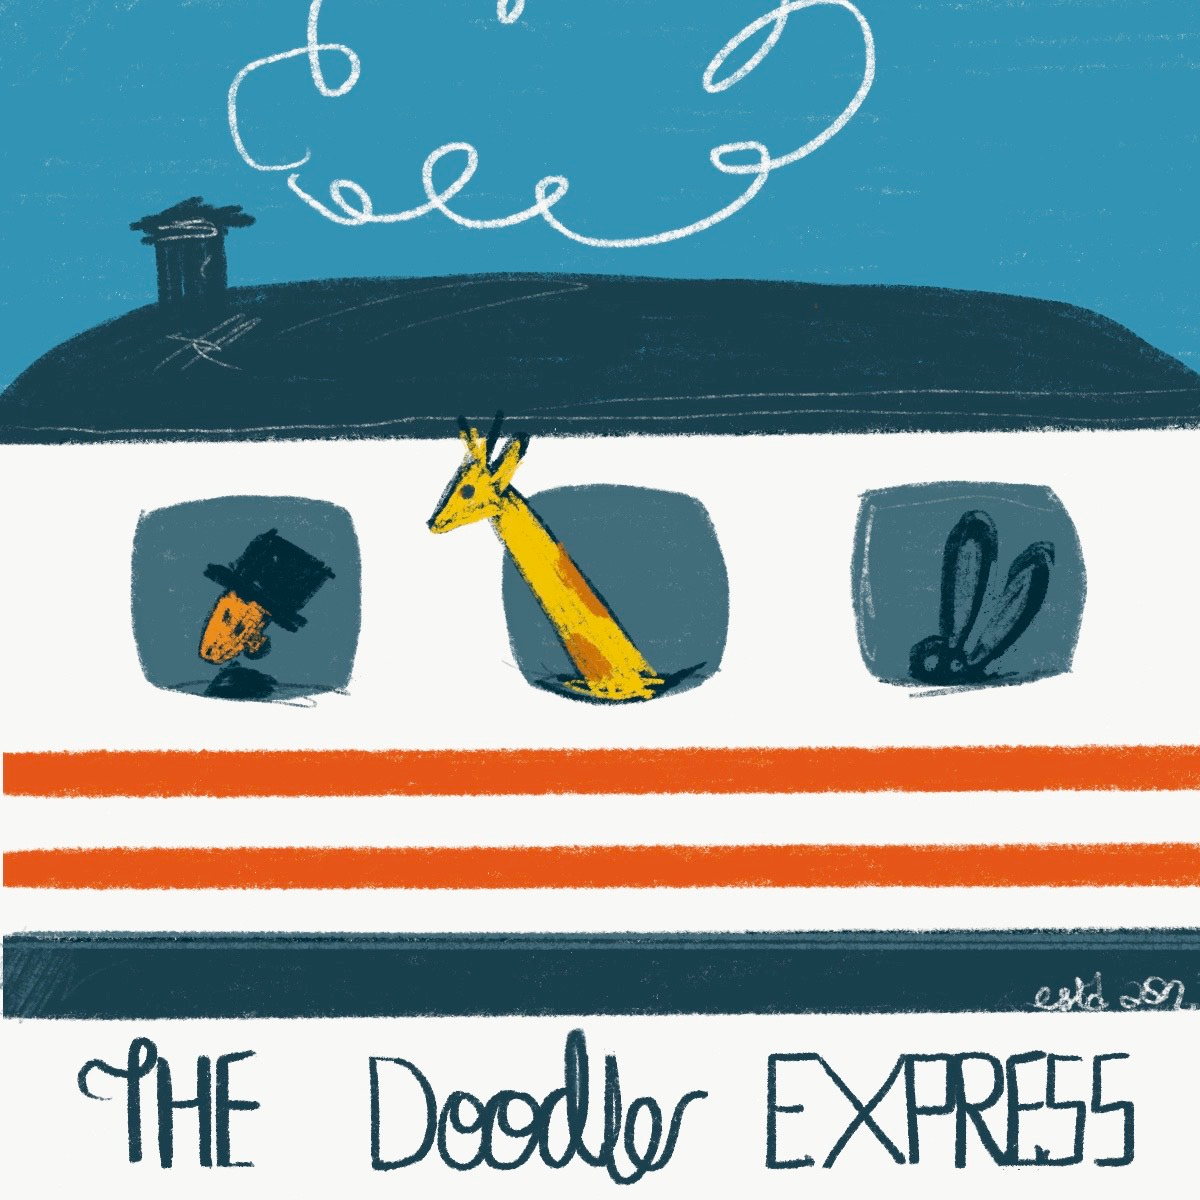 The Doodle Express